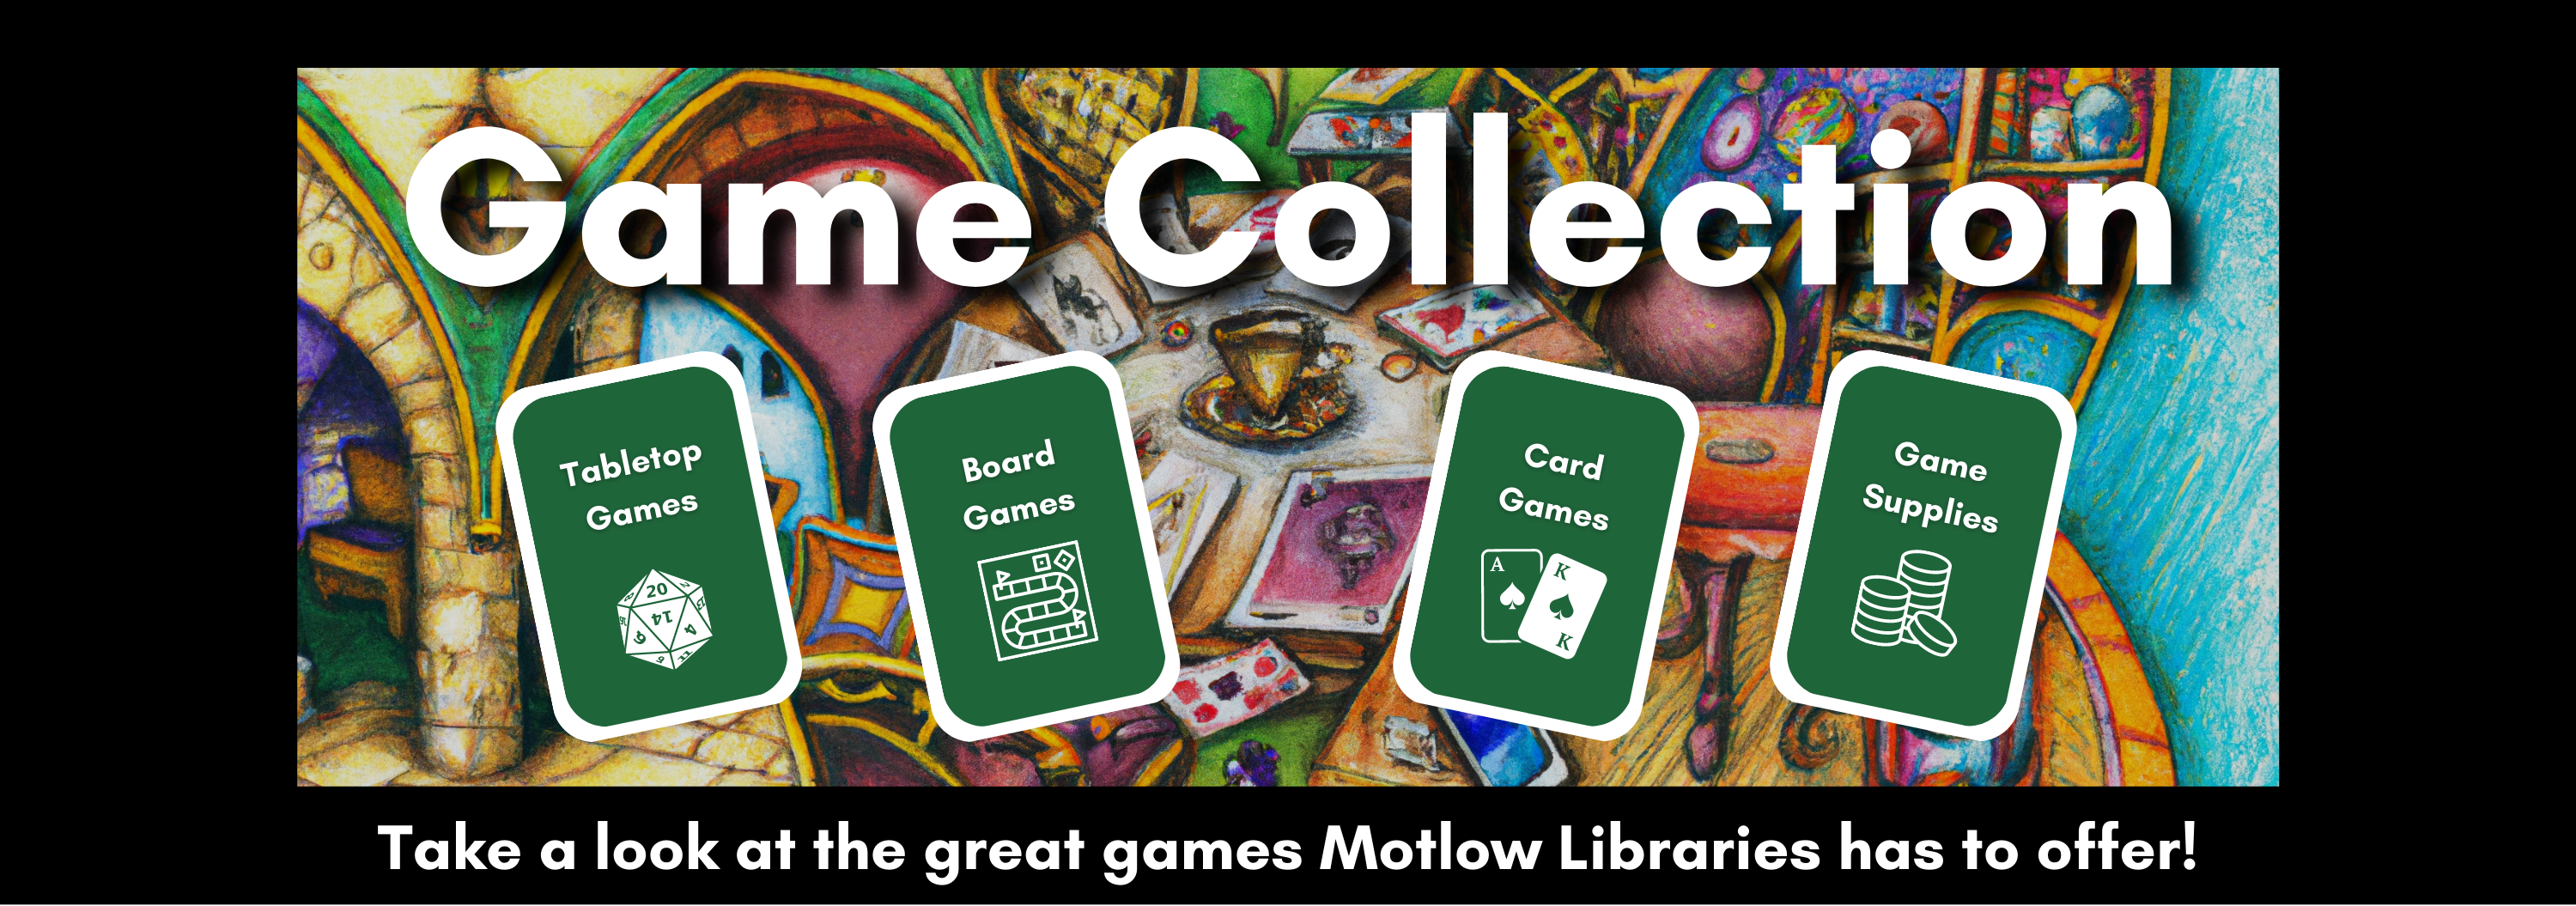 Game collection. Take a look at the great games Motlow Libraries has to offer! Students can borrow tabletop games, board games, card games and game supplies.